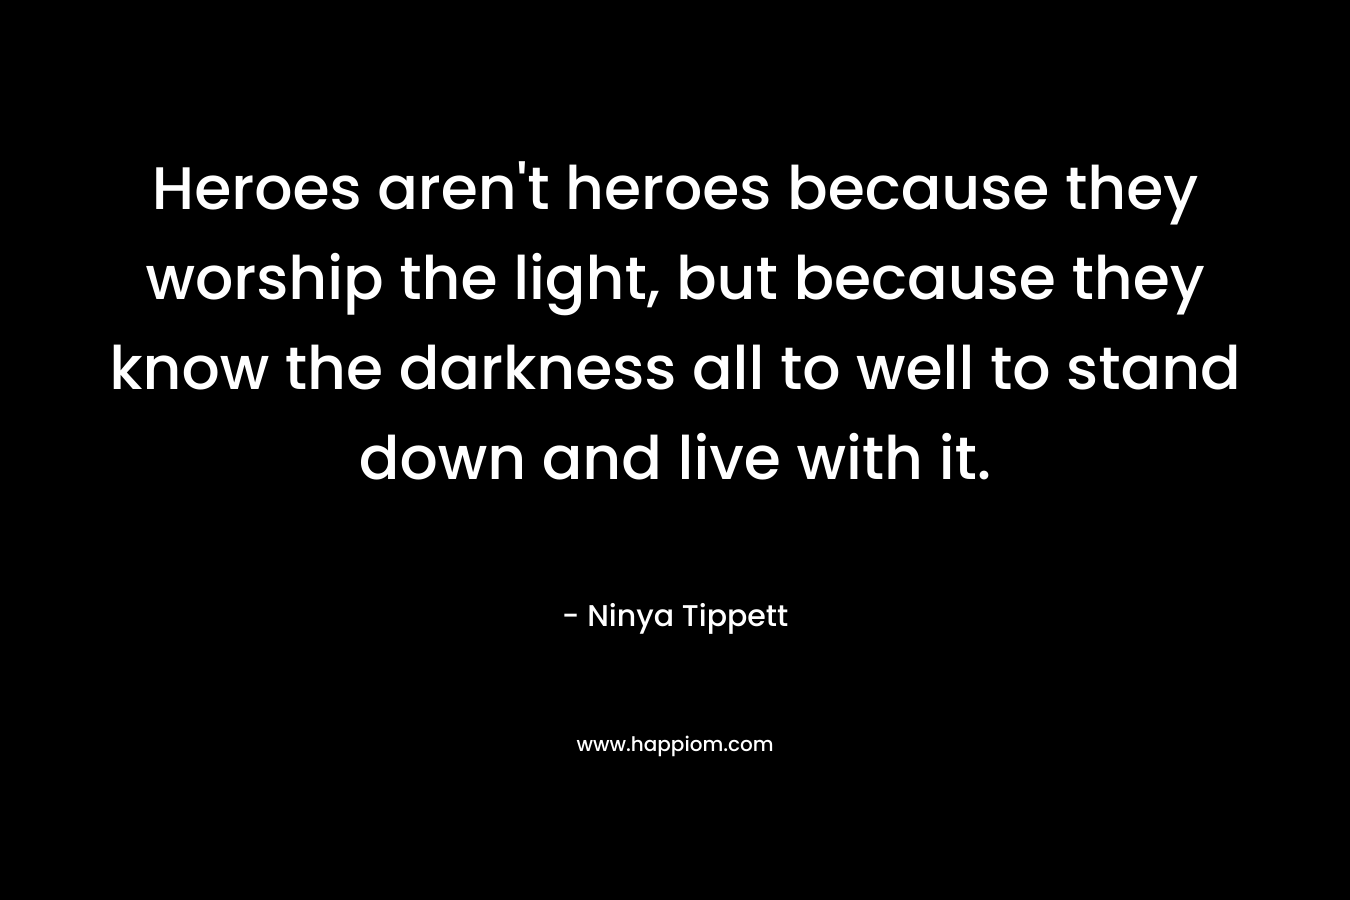 Heroes aren’t heroes because they worship the light, but because they know the darkness all to well to stand down and live with it. – Ninya Tippett